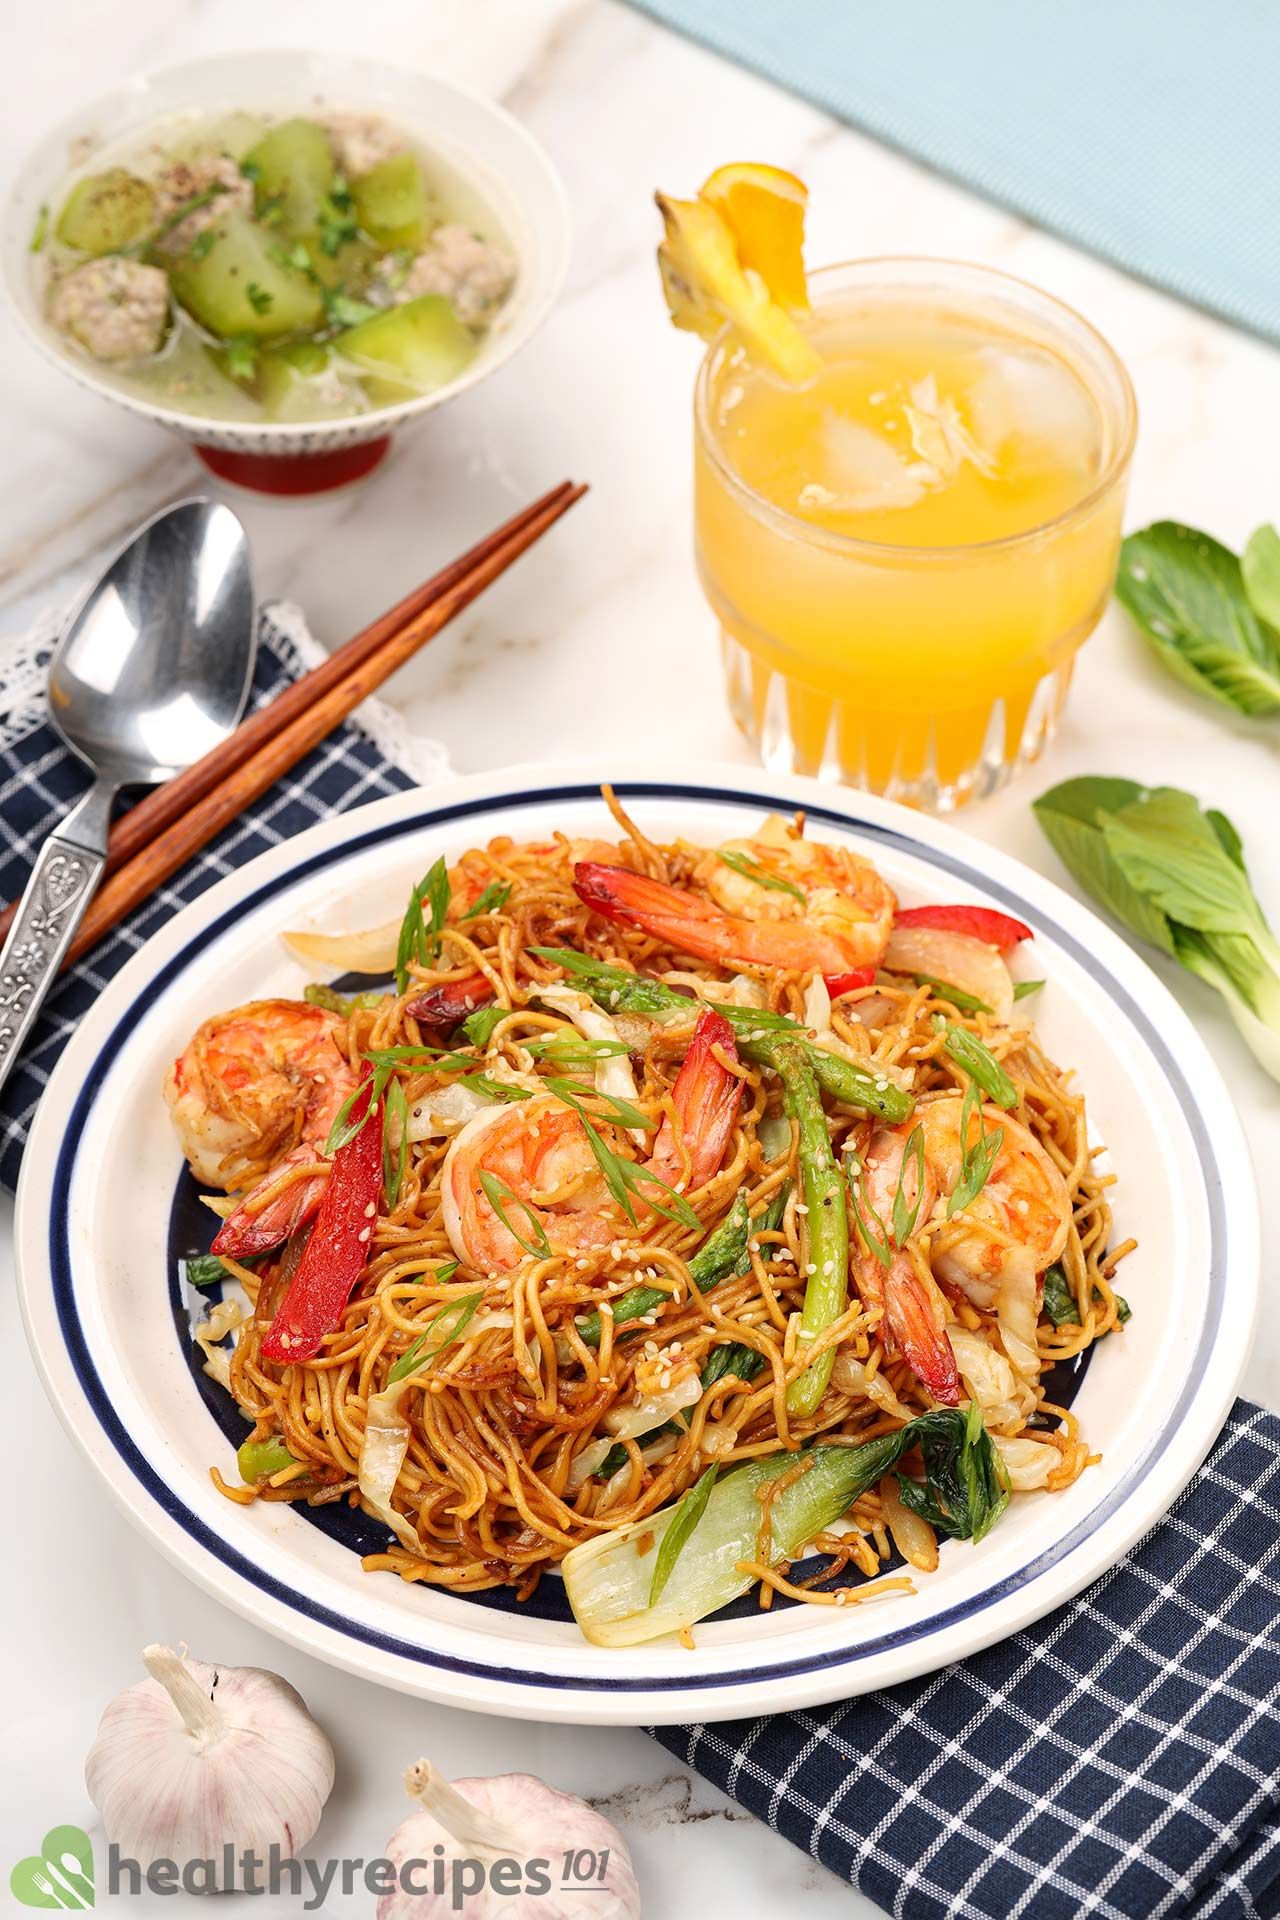 What to Serve With Shrimp Chow Mein